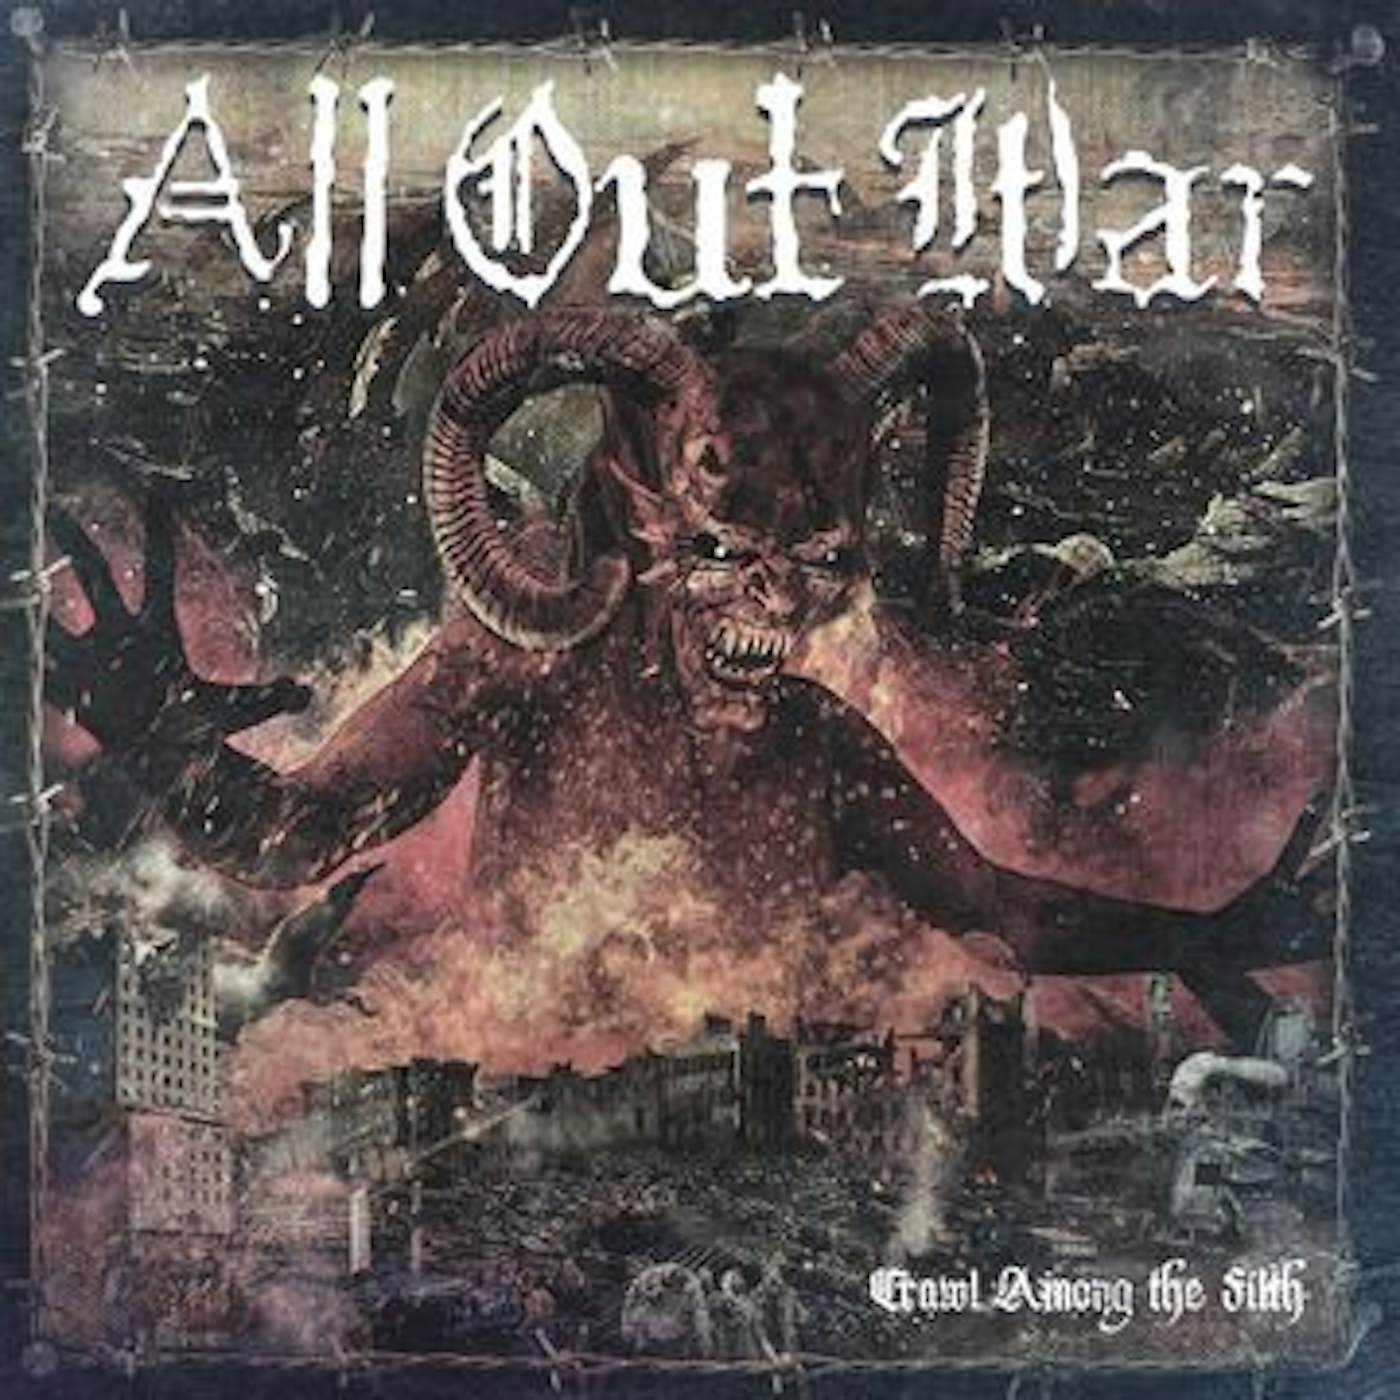 All Out War Crawl Among the Filth Vinyl Record